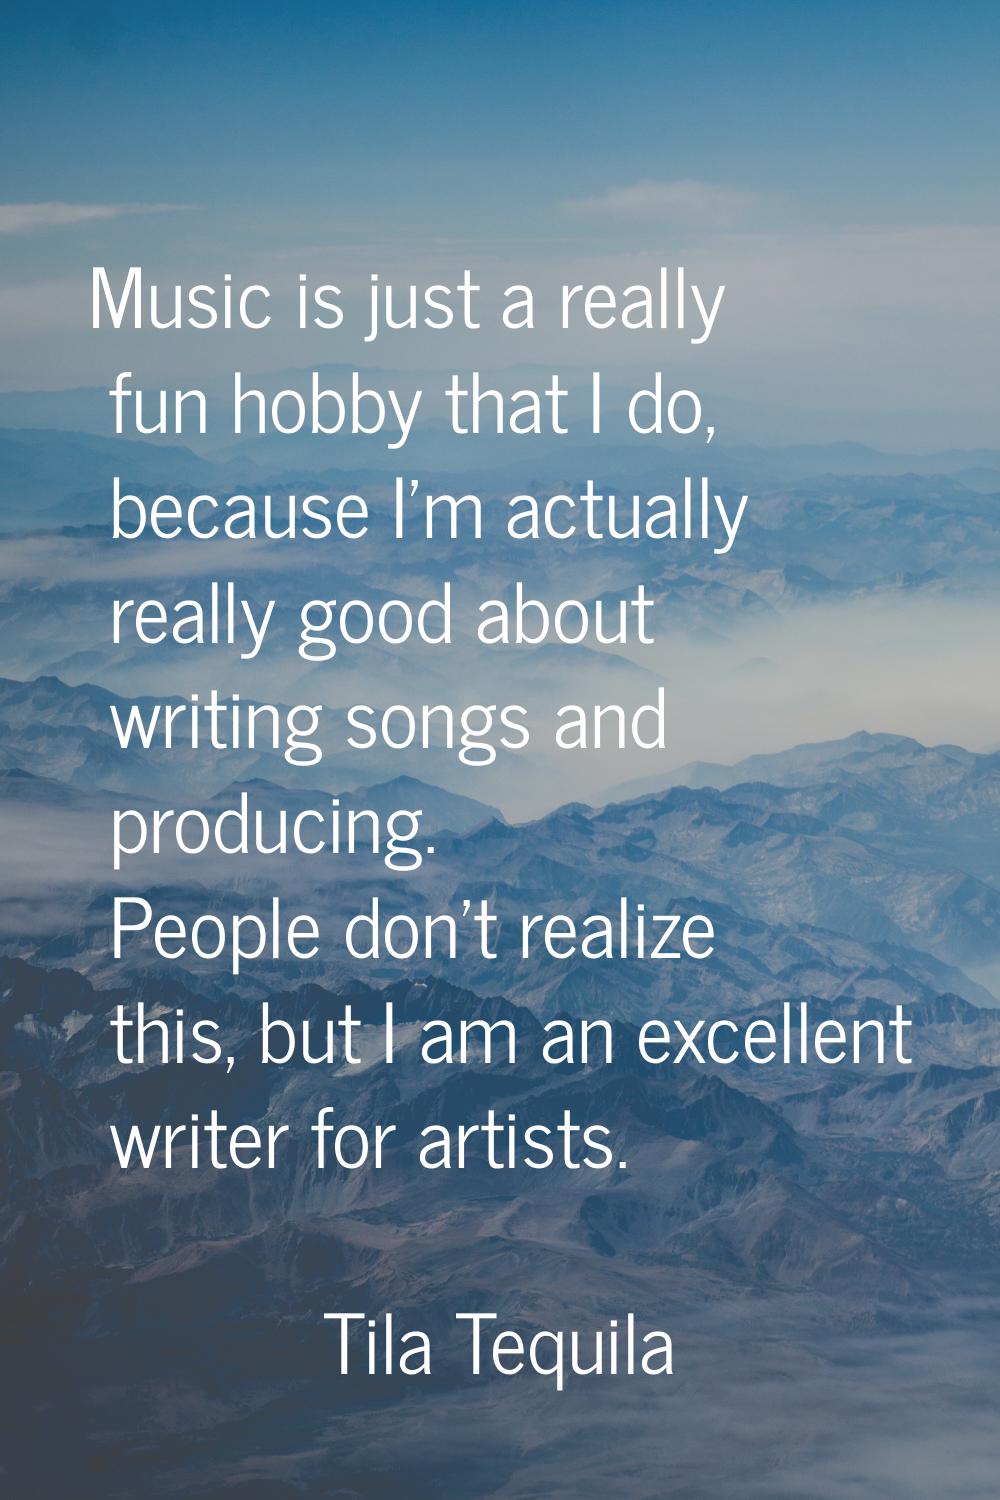 Music is just a really fun hobby that I do, because I'm actually really good about writing songs an